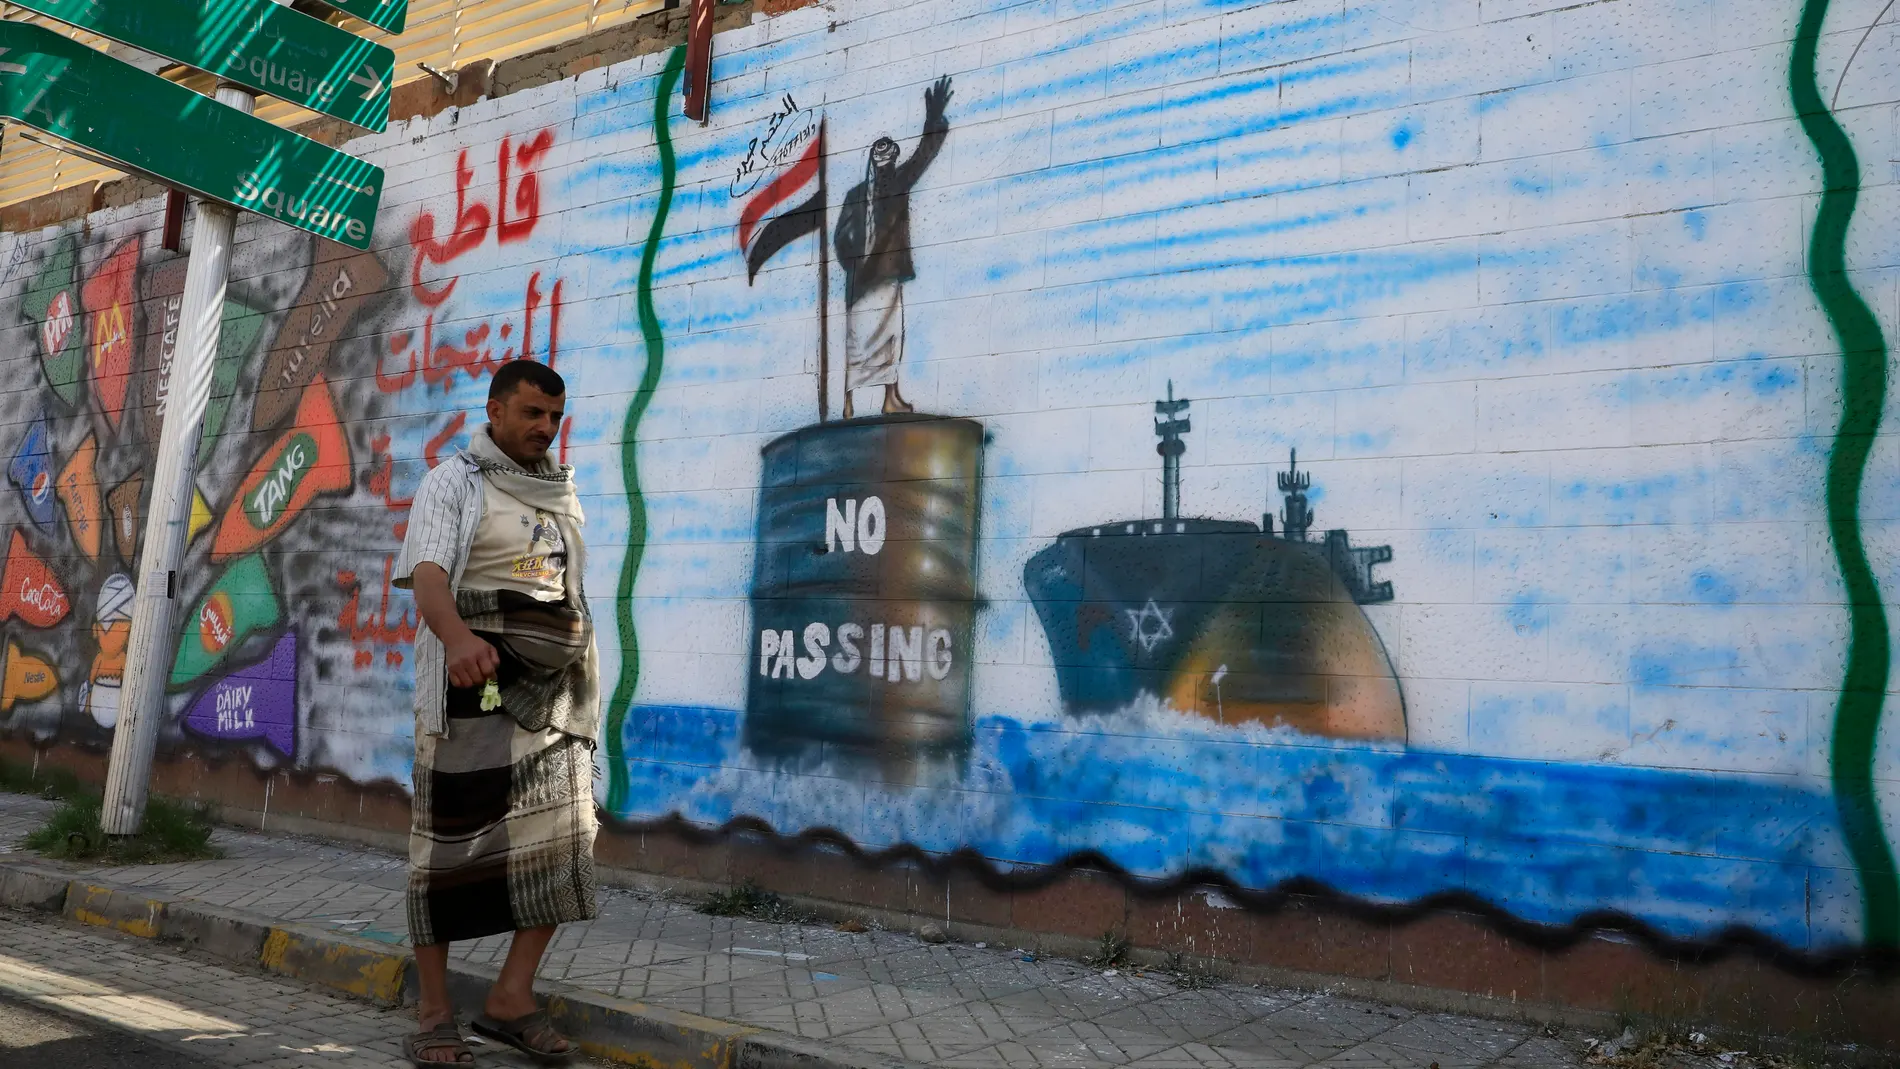 Sana'a (Yemen), 19/02/2024.- A person walks past a wall with graffiti depicting a Houthi fighter stopping an Israeli ship off the coast of Yemen, in Sana'a, Yemen, 19 February 2024. Yemen's Houthis have claimed responsibility for a new missile attack on UK-registered cargo ship in the Gulf of Aden off the coast of Yemen, according to a statement by Houthi military spokesman Yahya Sarea. The attack came just a day after the US forces launched five strikes on Houthi targets, including an unmann...